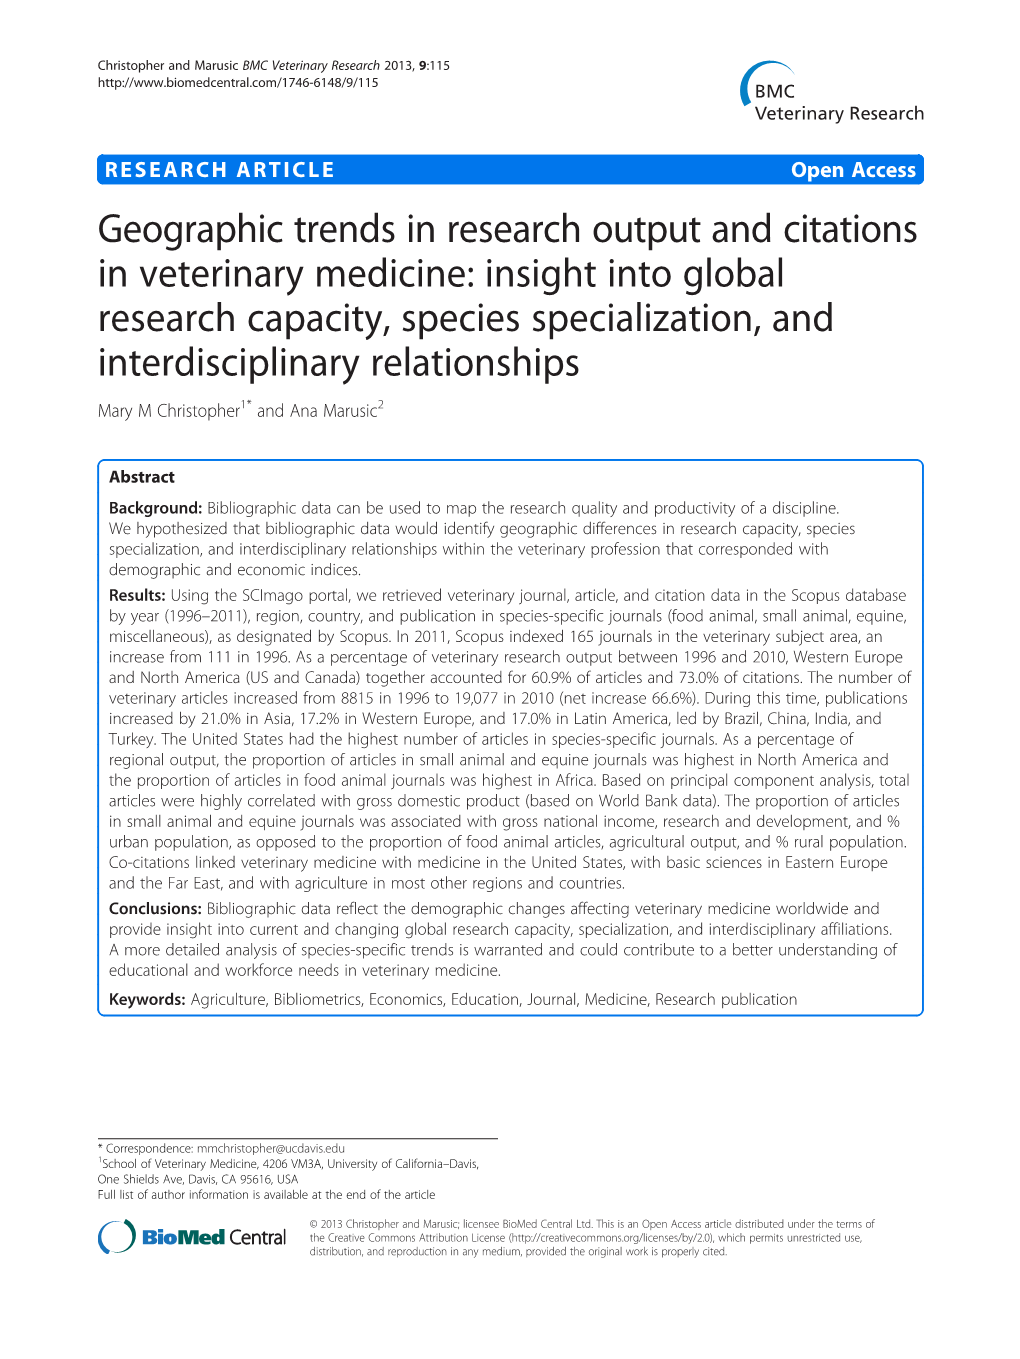 Geographic Trends in Research Output and Citations in Veterinary Medicine